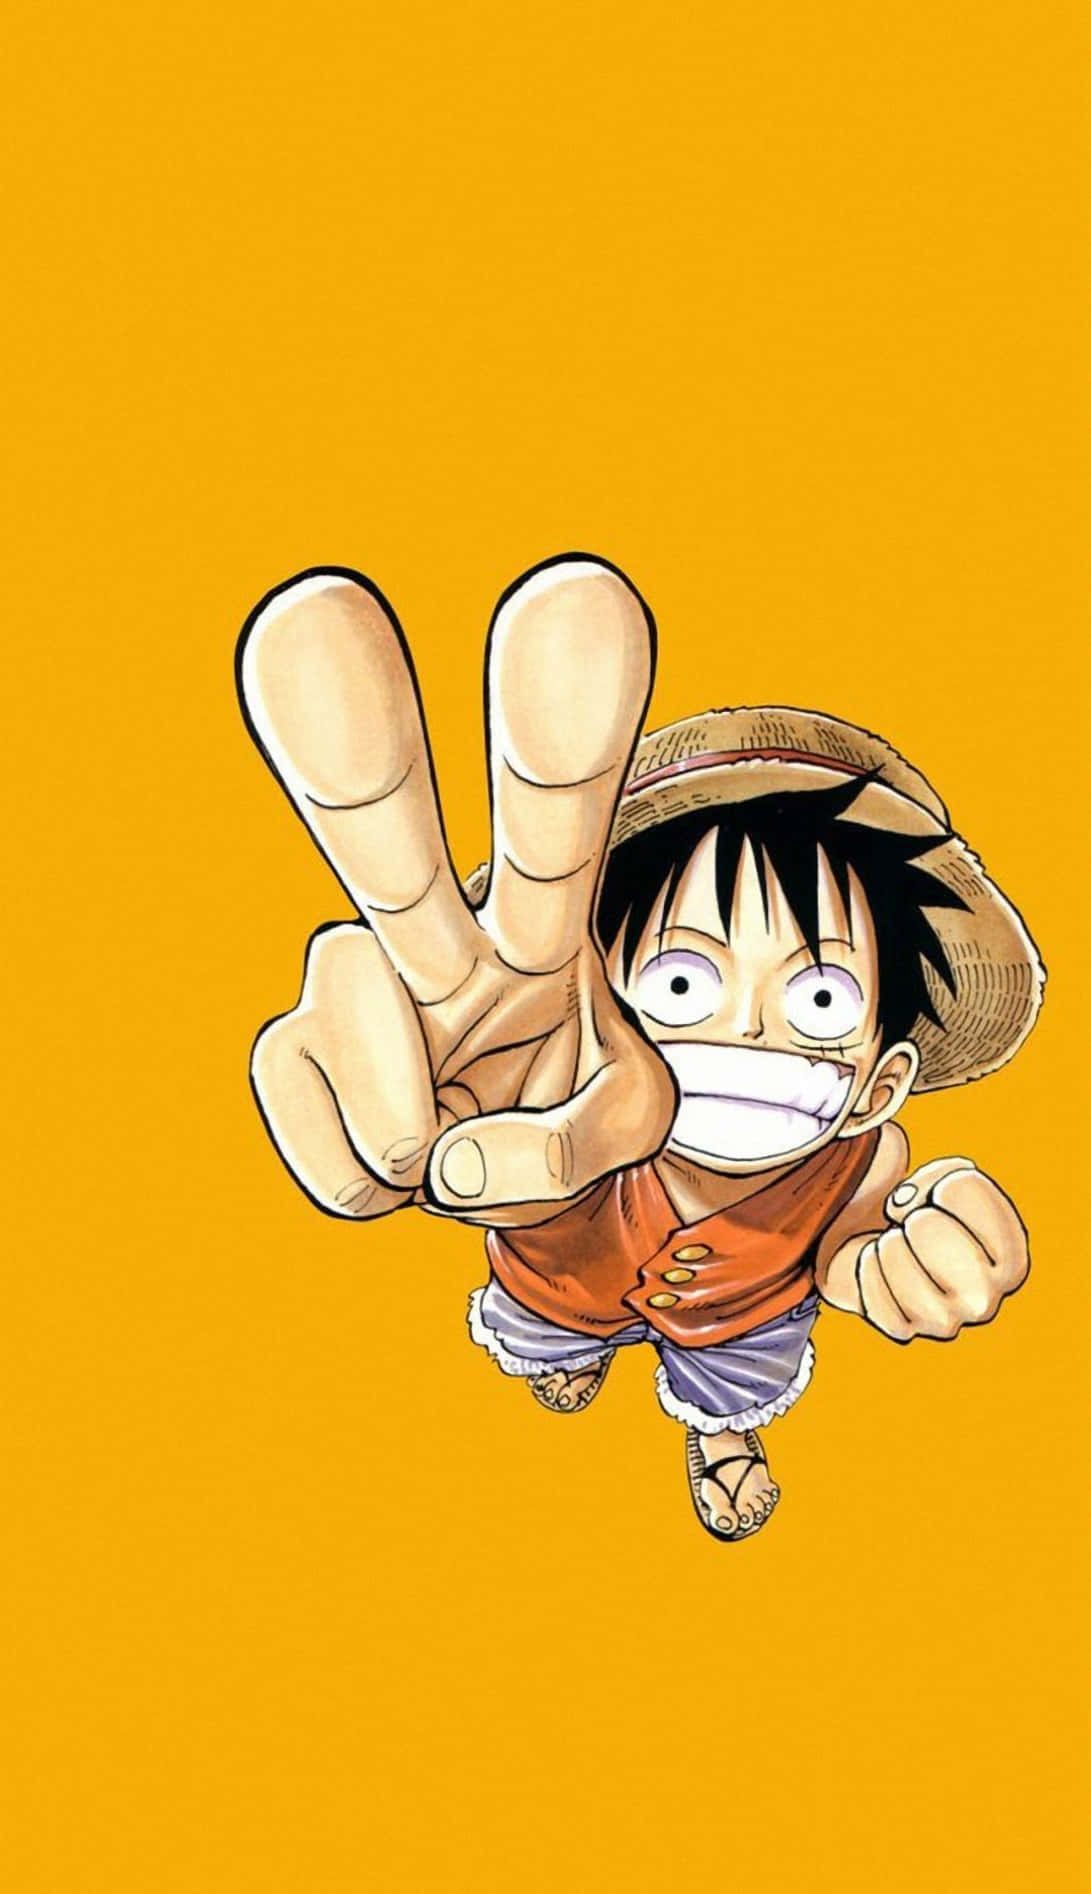 One Piece D. Luffy Anime Wallpapers - Luffy Wallpapers for iPhone